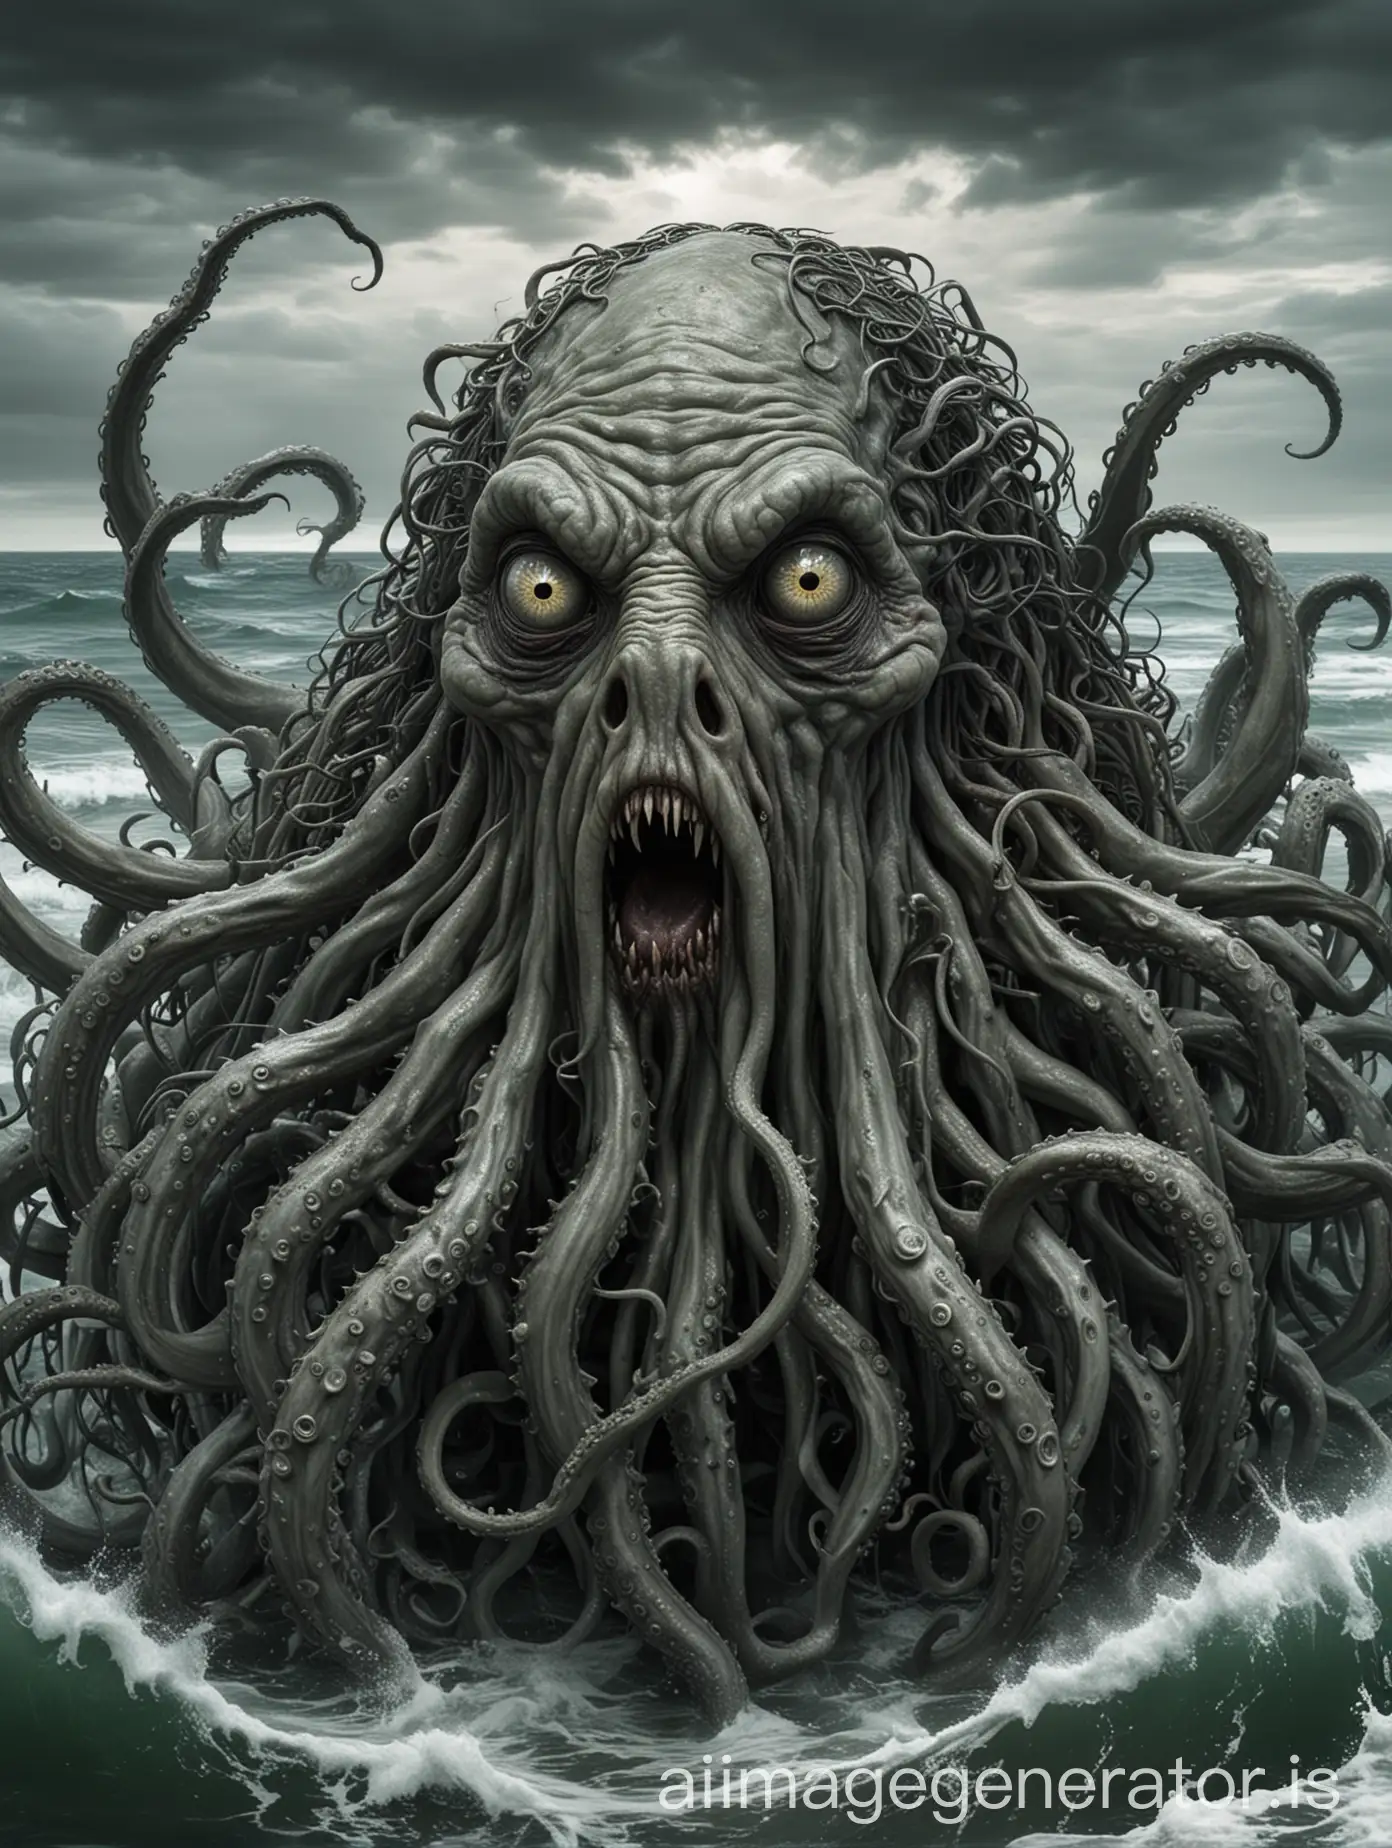 Eldritch-Sea-Monster-with-Tentacles-and-Piercing-Eyes-Emerges-from-the-Depths